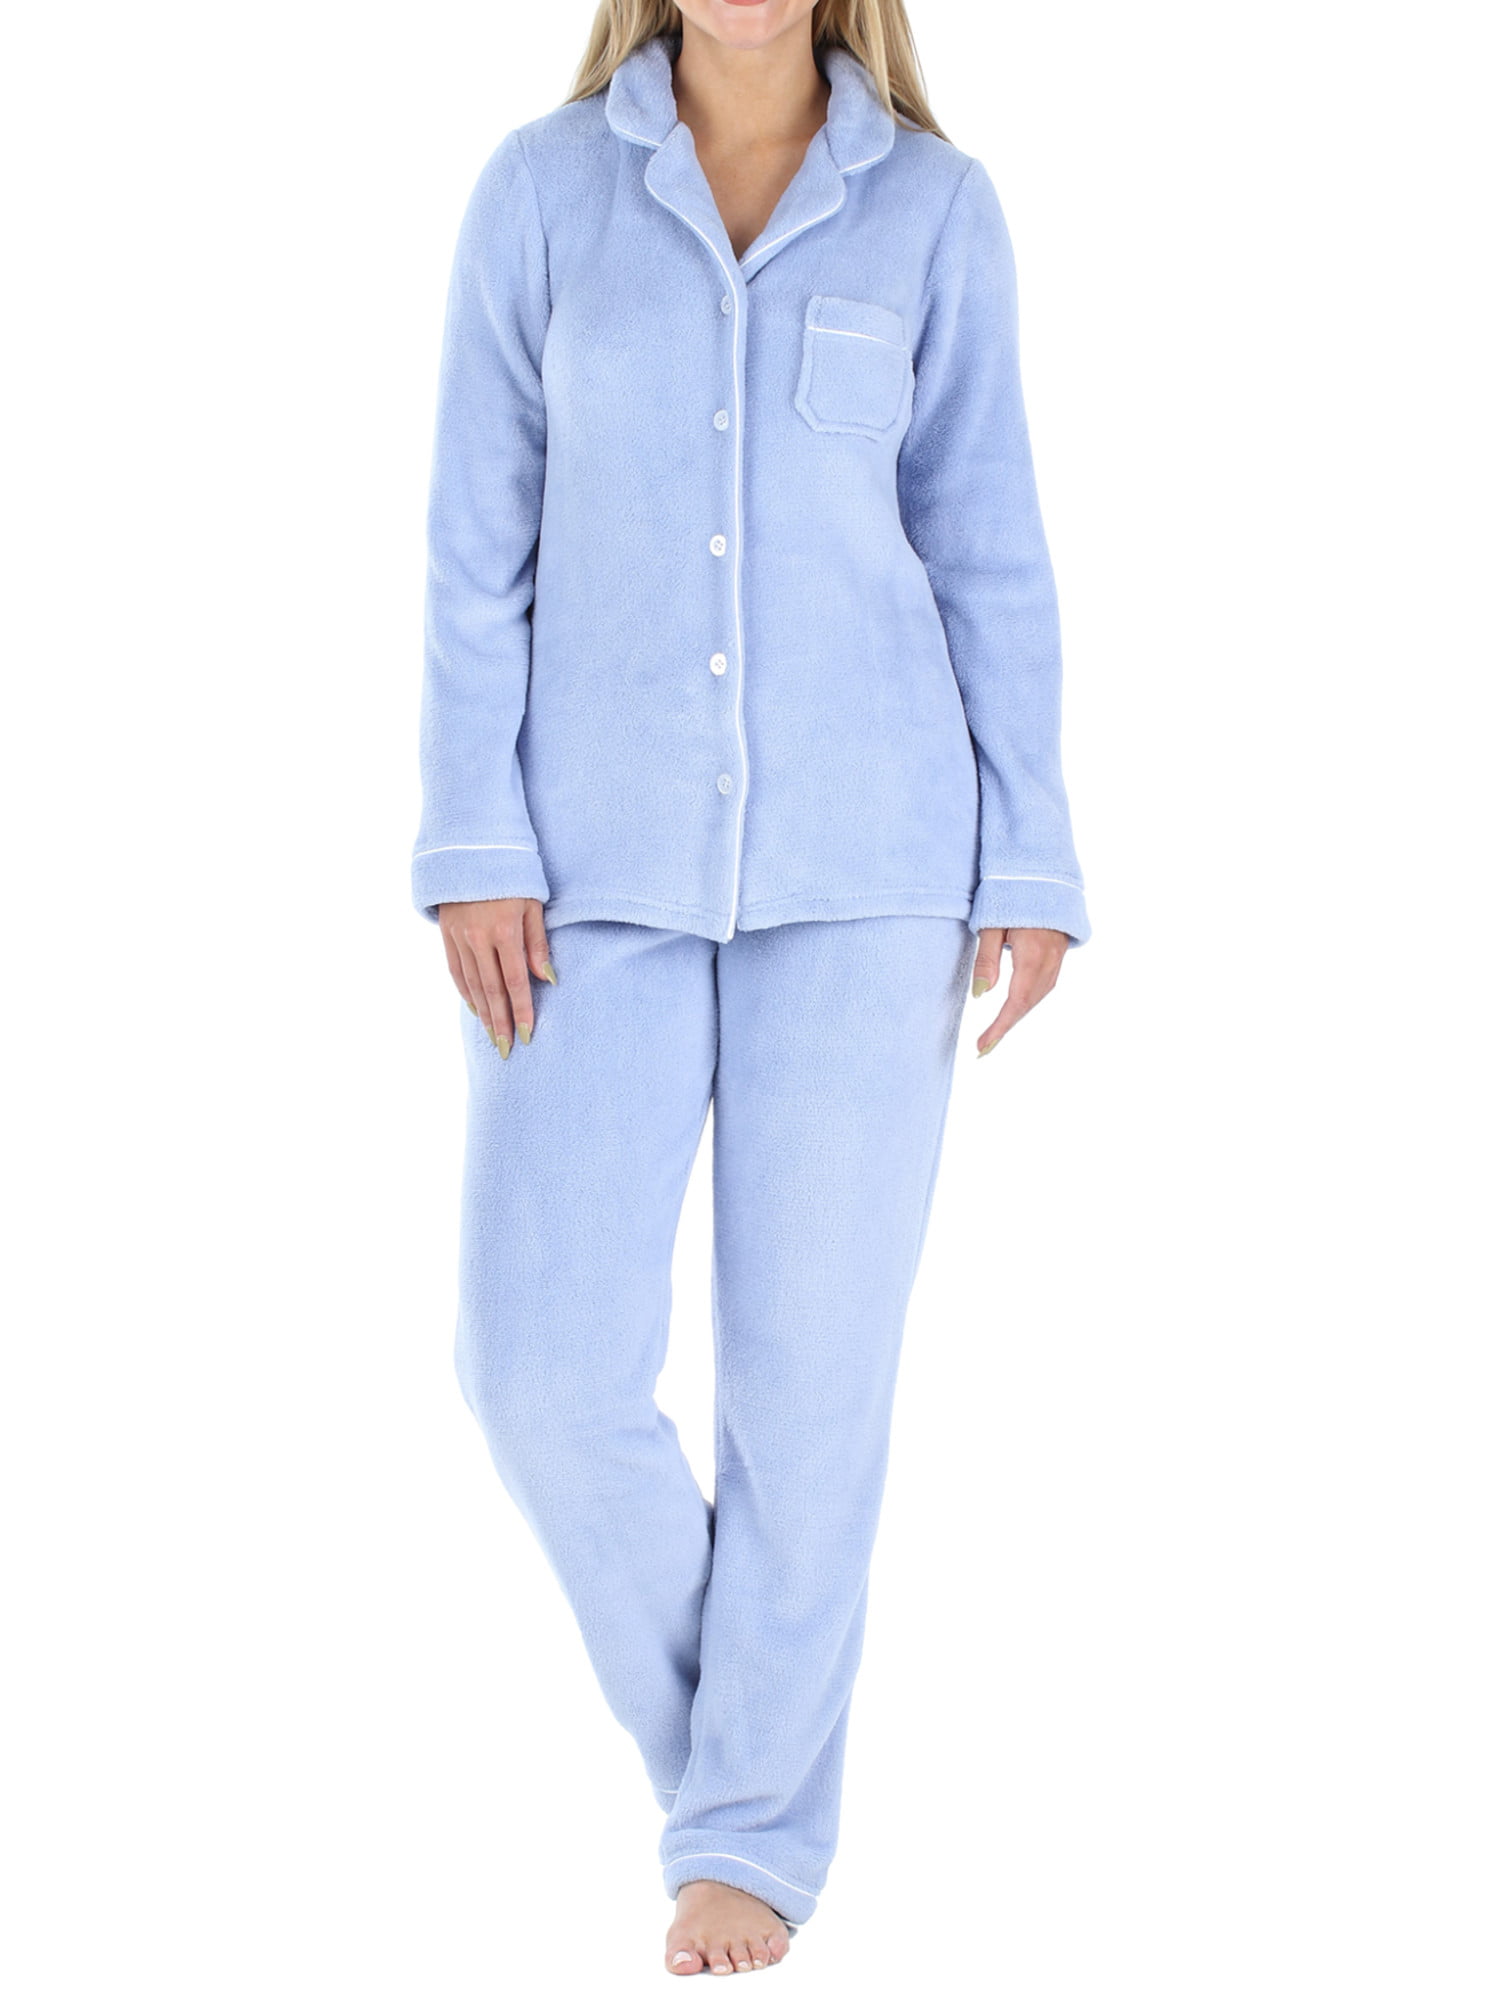 Womens Fitted Pajama Set and Separates by LazyOne Fitted Pajama Set and Separates for Women